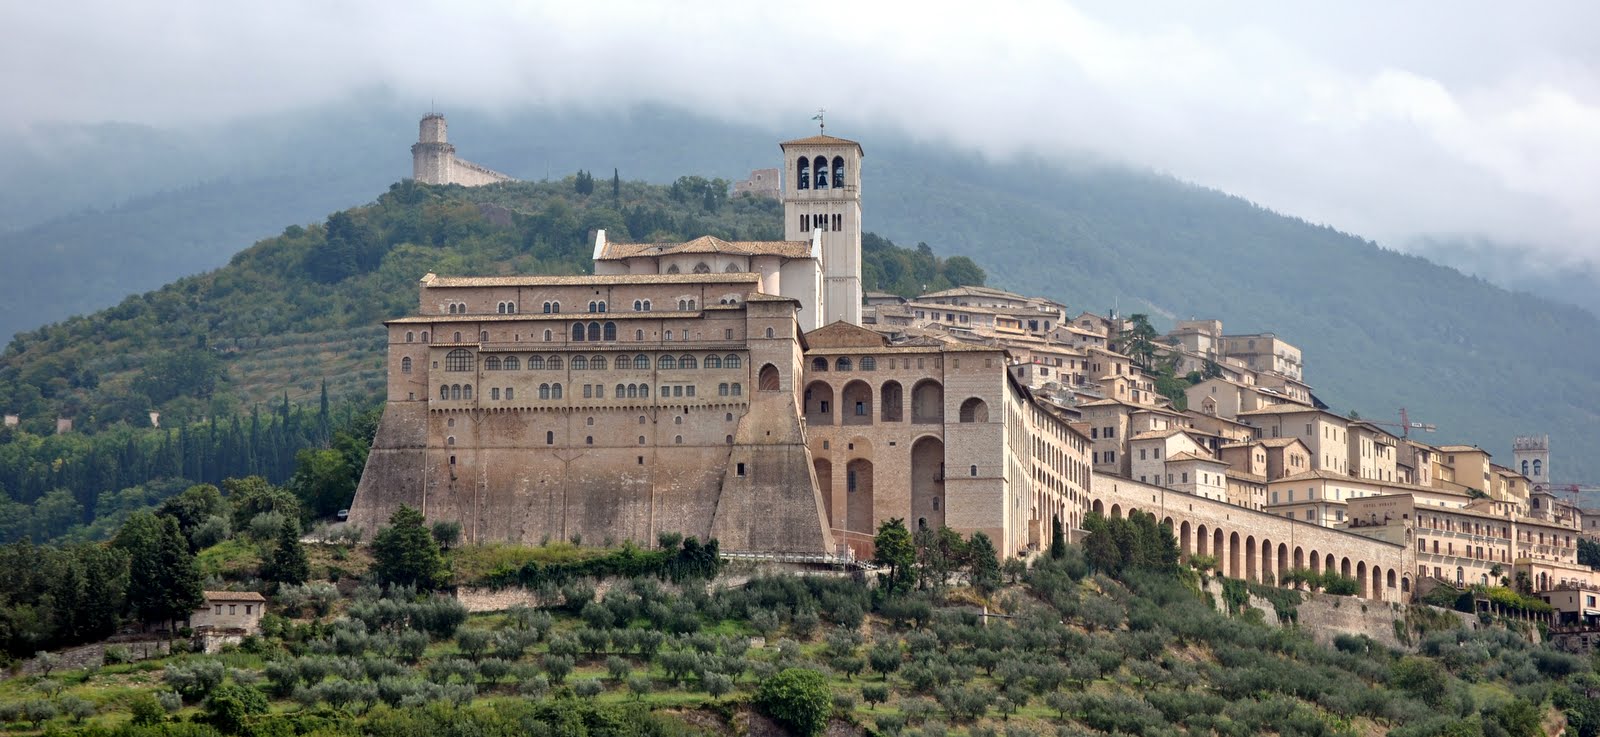 Images of Assisi | 1600x737